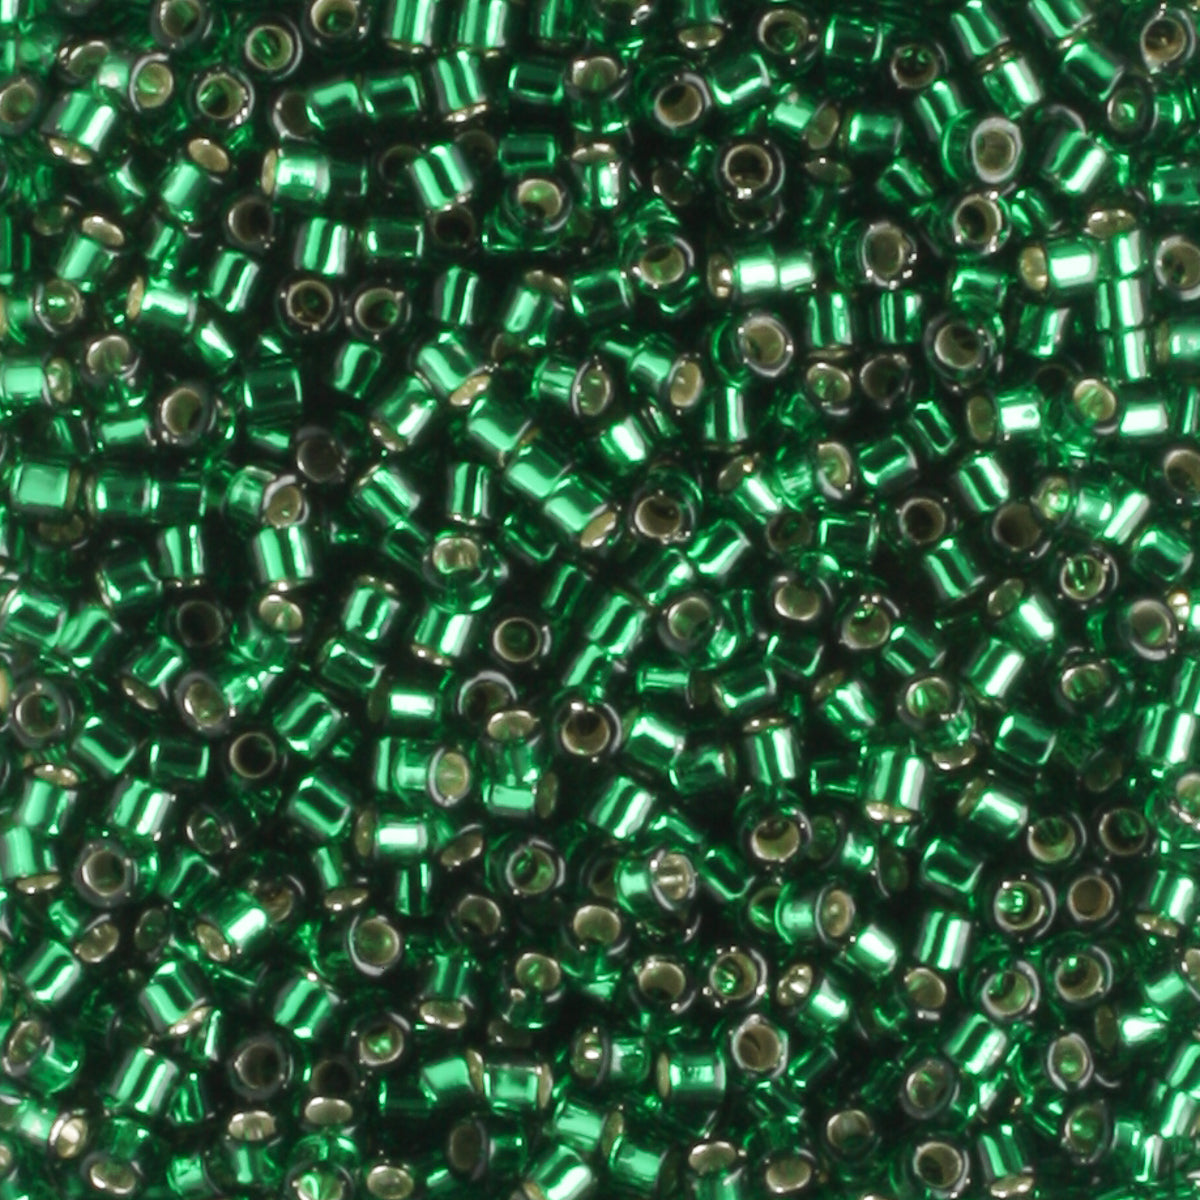 DB0148 Silver Lined Forest Green - 5 grams